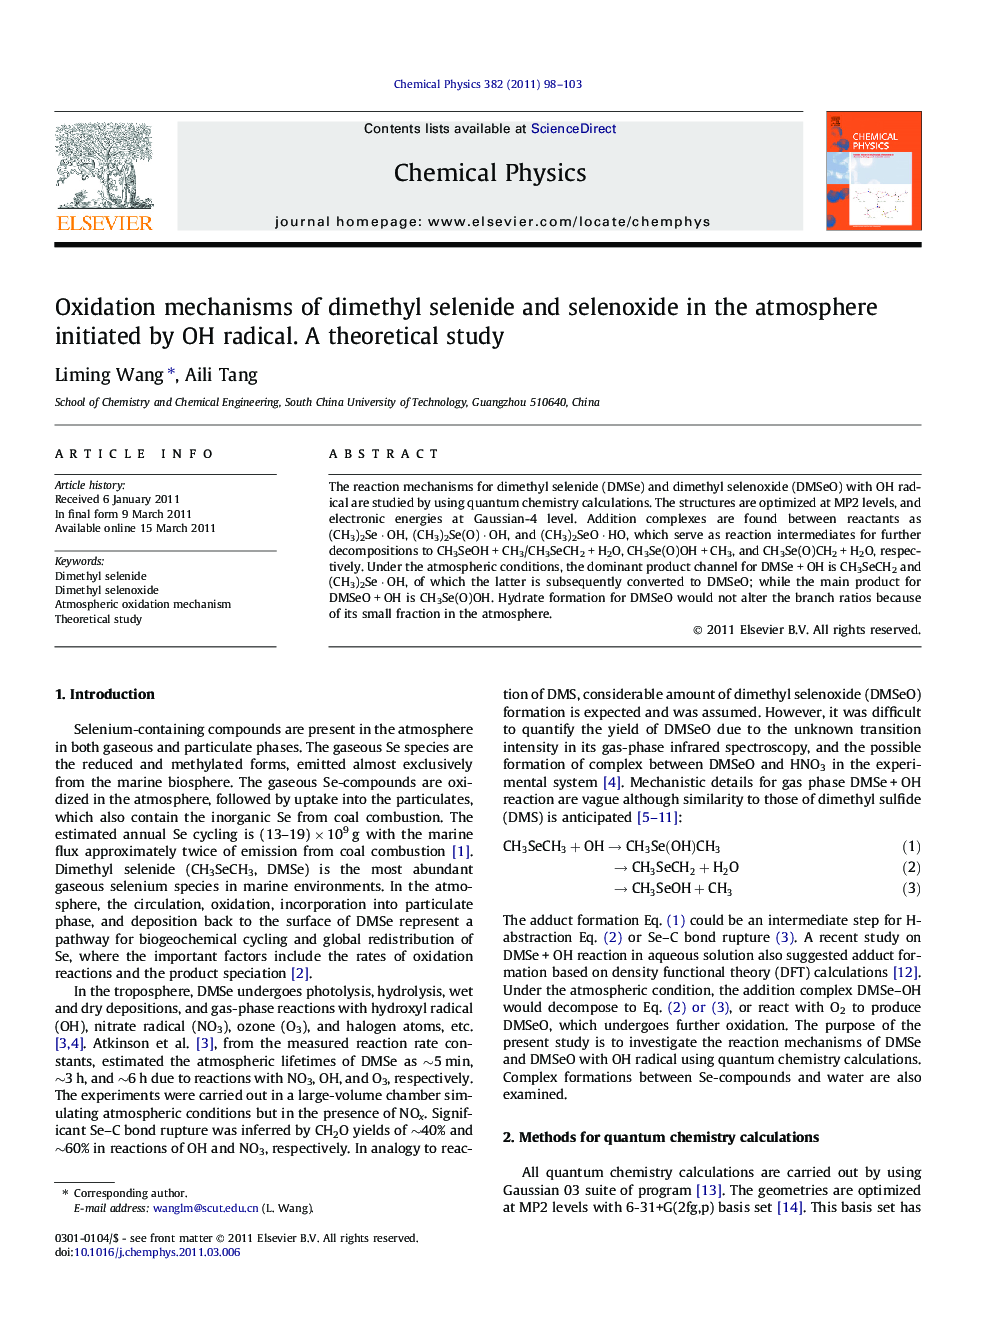 Oxidation mechanisms of dimethyl selenide and selenoxide in the atmosphere initiated by OH radical. A theoretical study